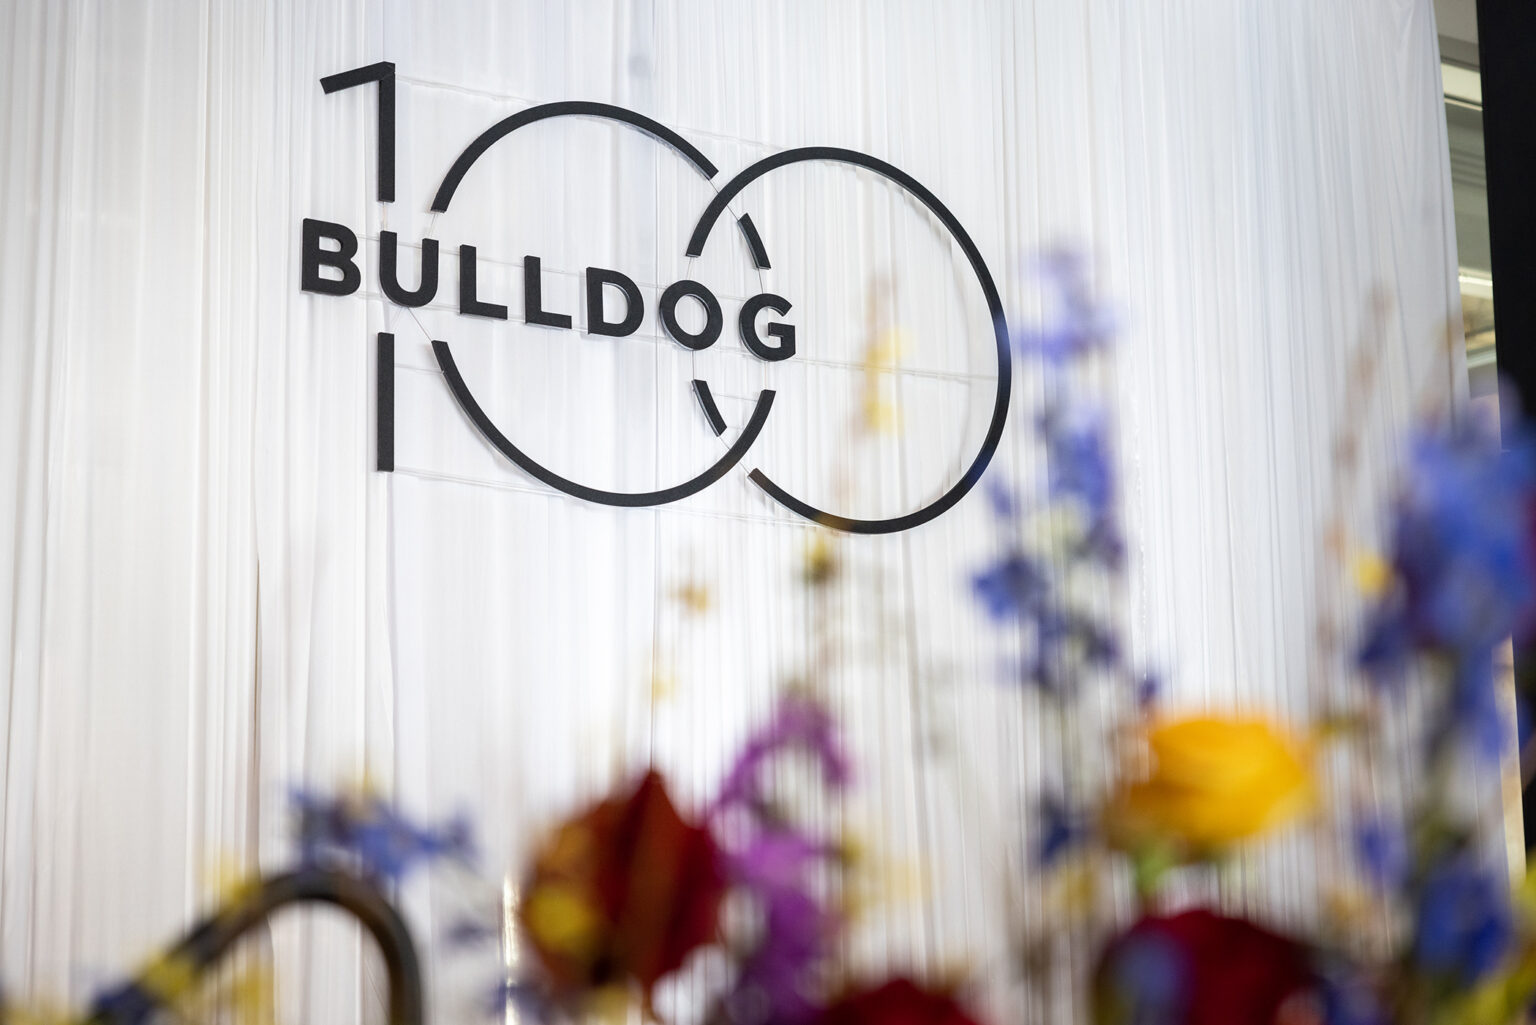 Last year’s Bulldog 100 reception was held at Sanford Stadium. (Photo by Decisive Moment Photography)